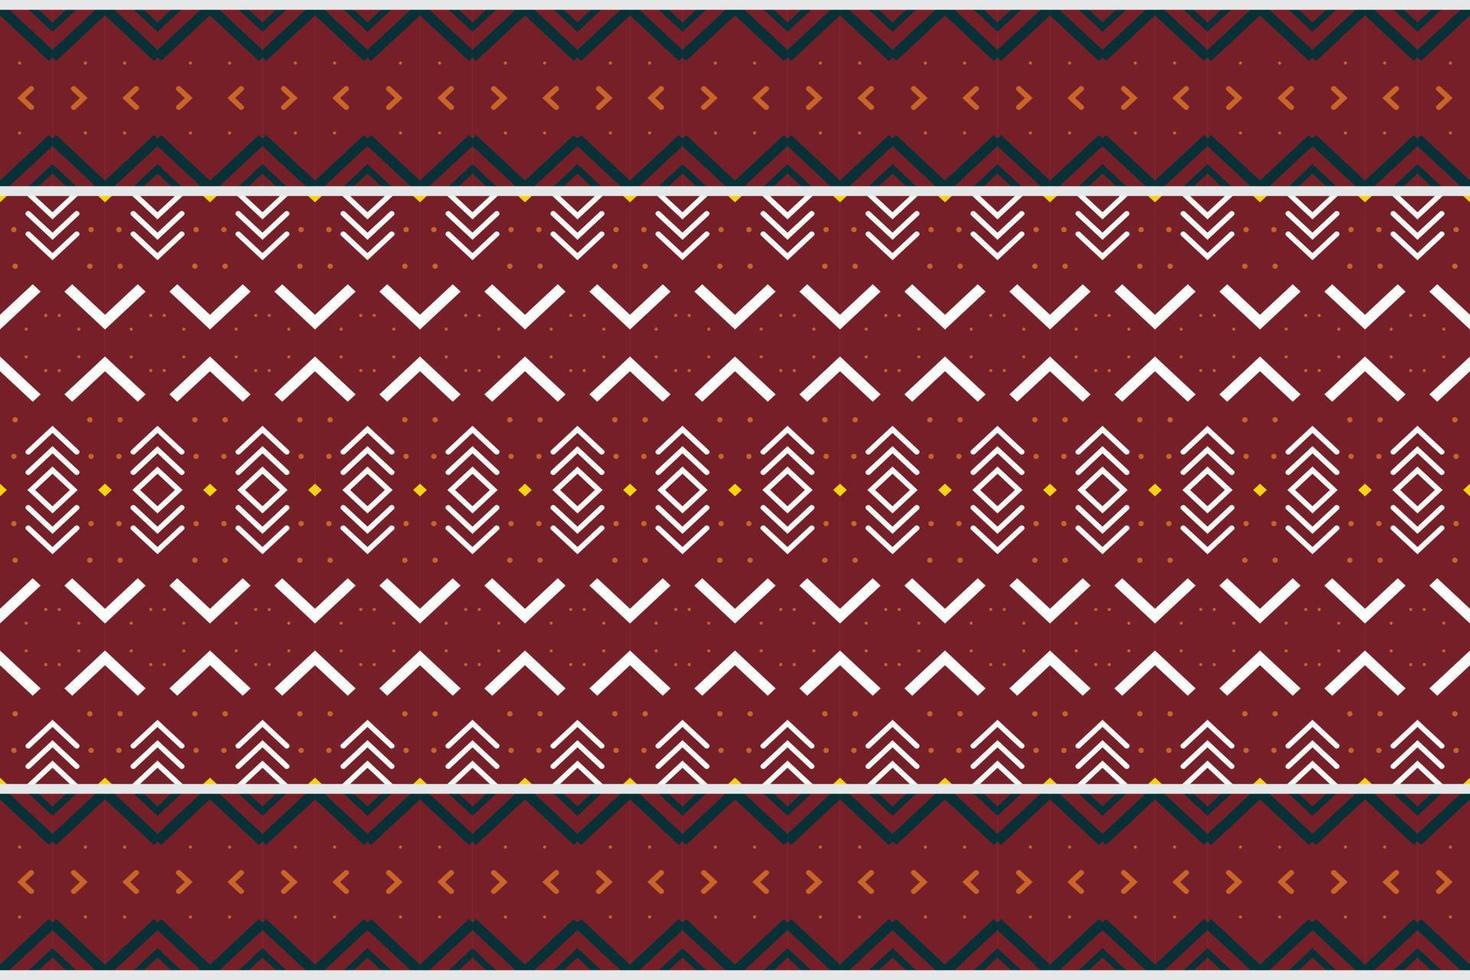 https://static.vecteezy.com/system/resources/previews/020/978/989/non_2x/simple-ethnic-design-drawing-traditional-patterned-wallpaper-it-is-a-pattern-geometric-shapes-create-beautiful-fabric-patterns-design-for-print-using-in-the-fashion-industry-vector.jpg